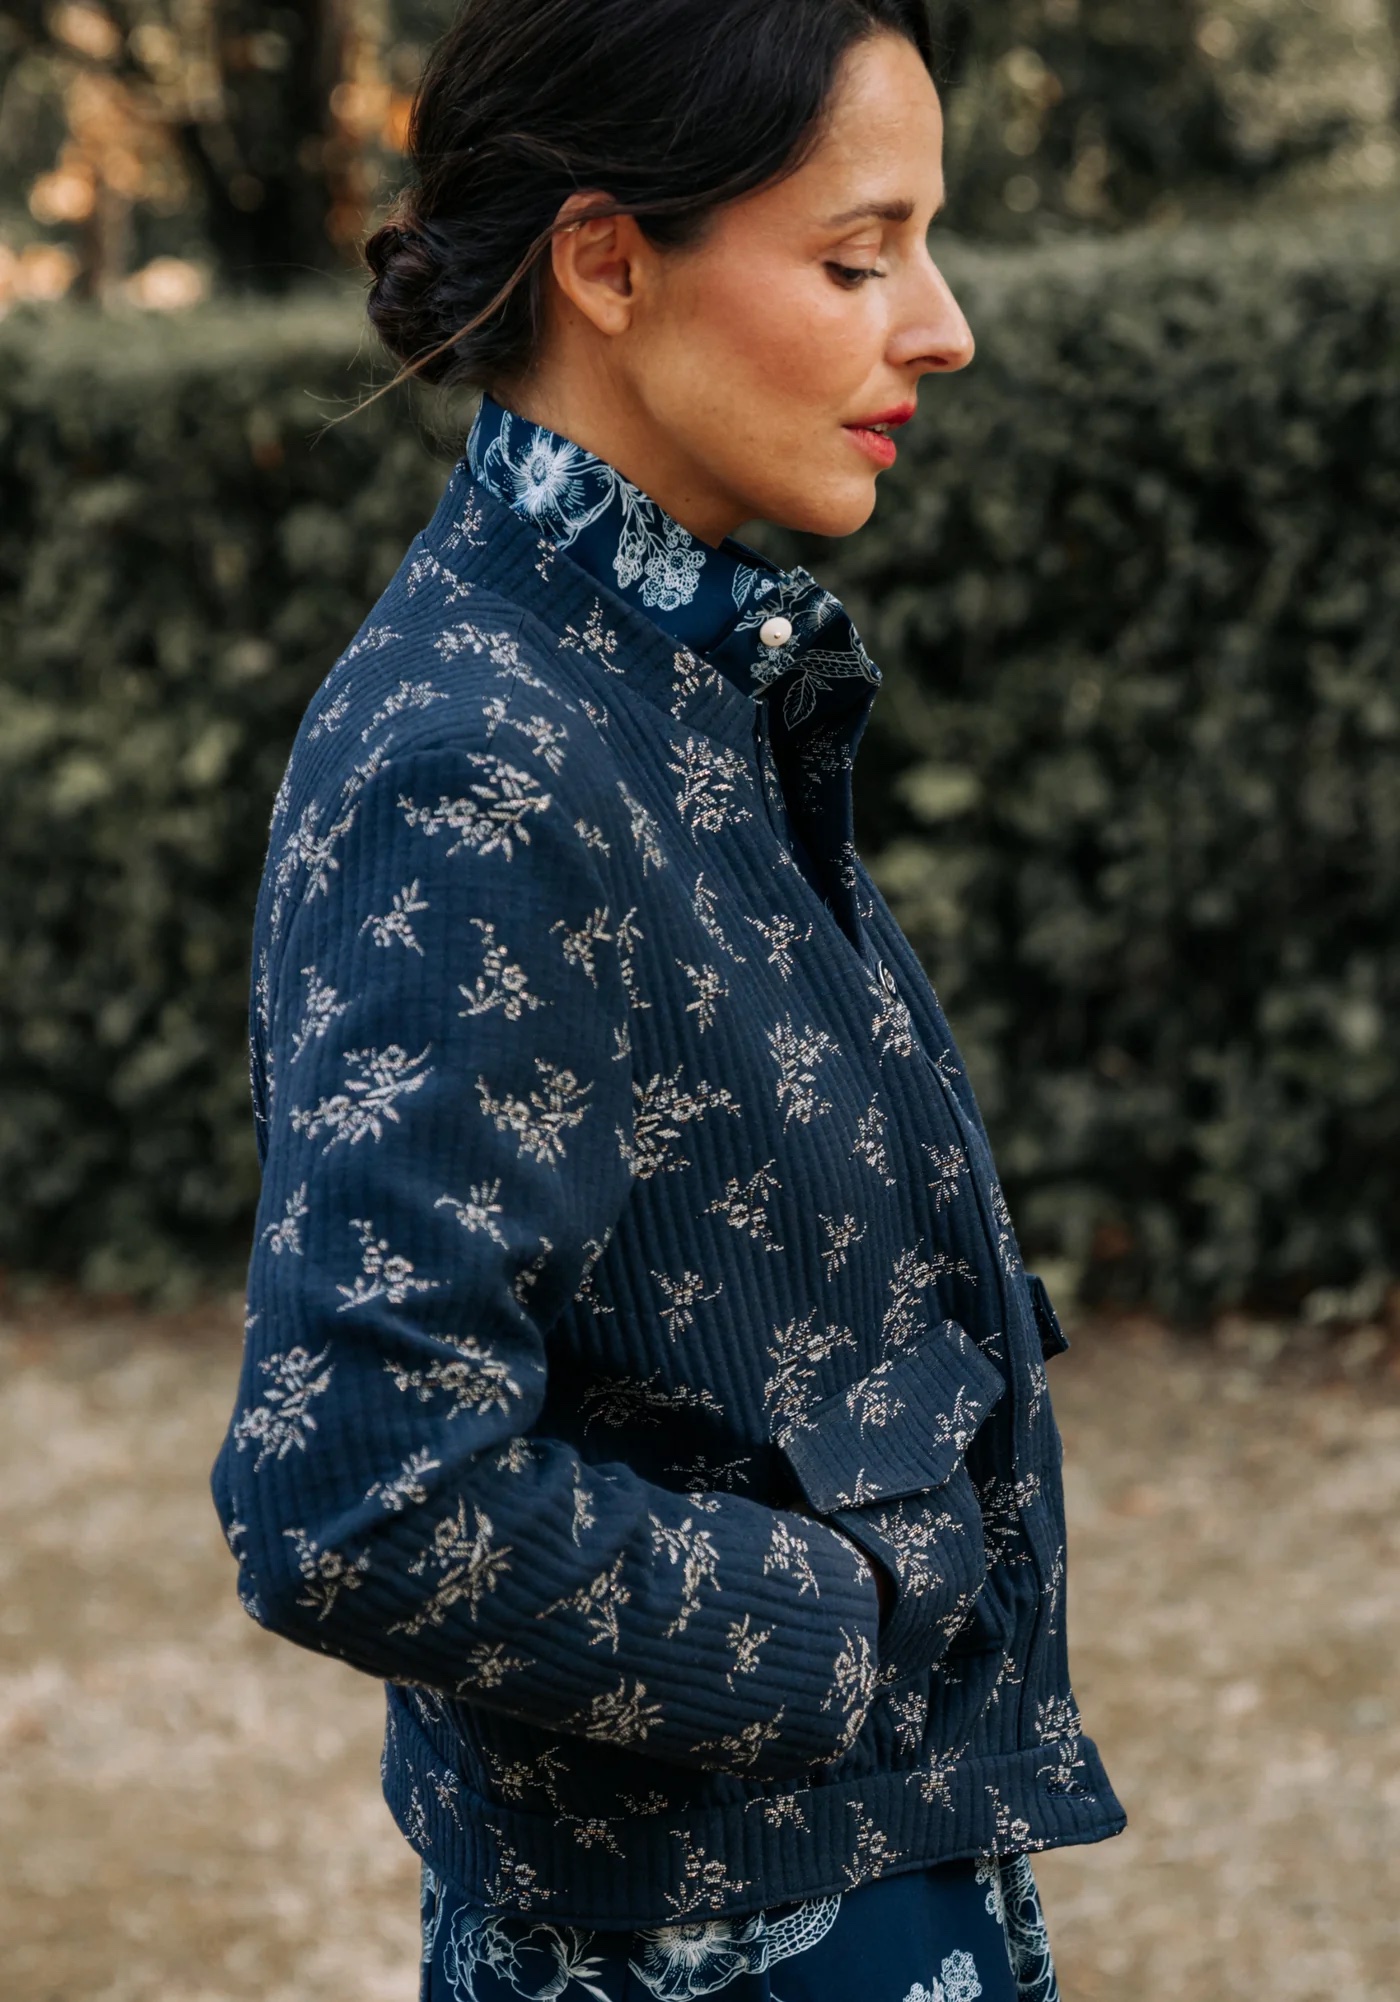 Woman wearing the Dandelion Jacket sewing pattern from Maison Fauve on The Fold Line. A jacket pattern made in jacquard, wool, tweed, denim, or gabardine fabrics, featuring a waistband, button front closure, back pleats, stand collar, and front patch pockets with flaps.